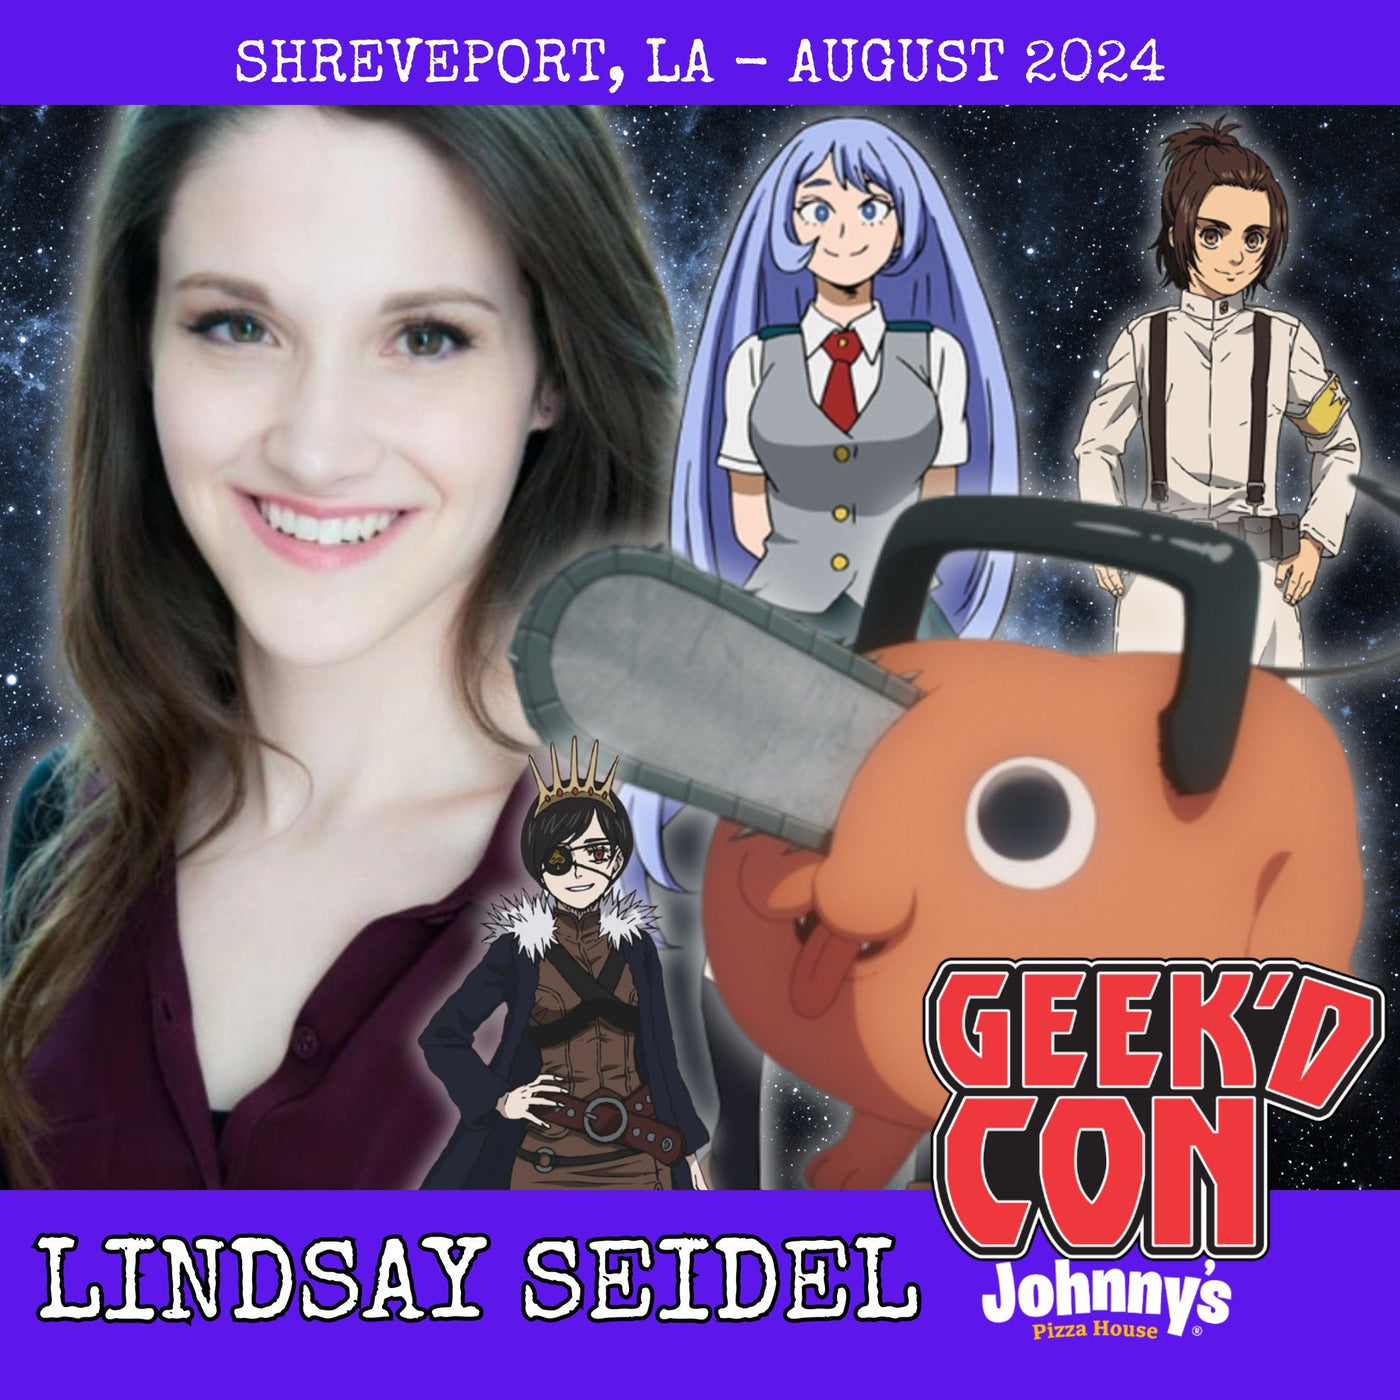 Lindsay Seidel Official Autograph Mail-In Service - Geek'd Con 2024